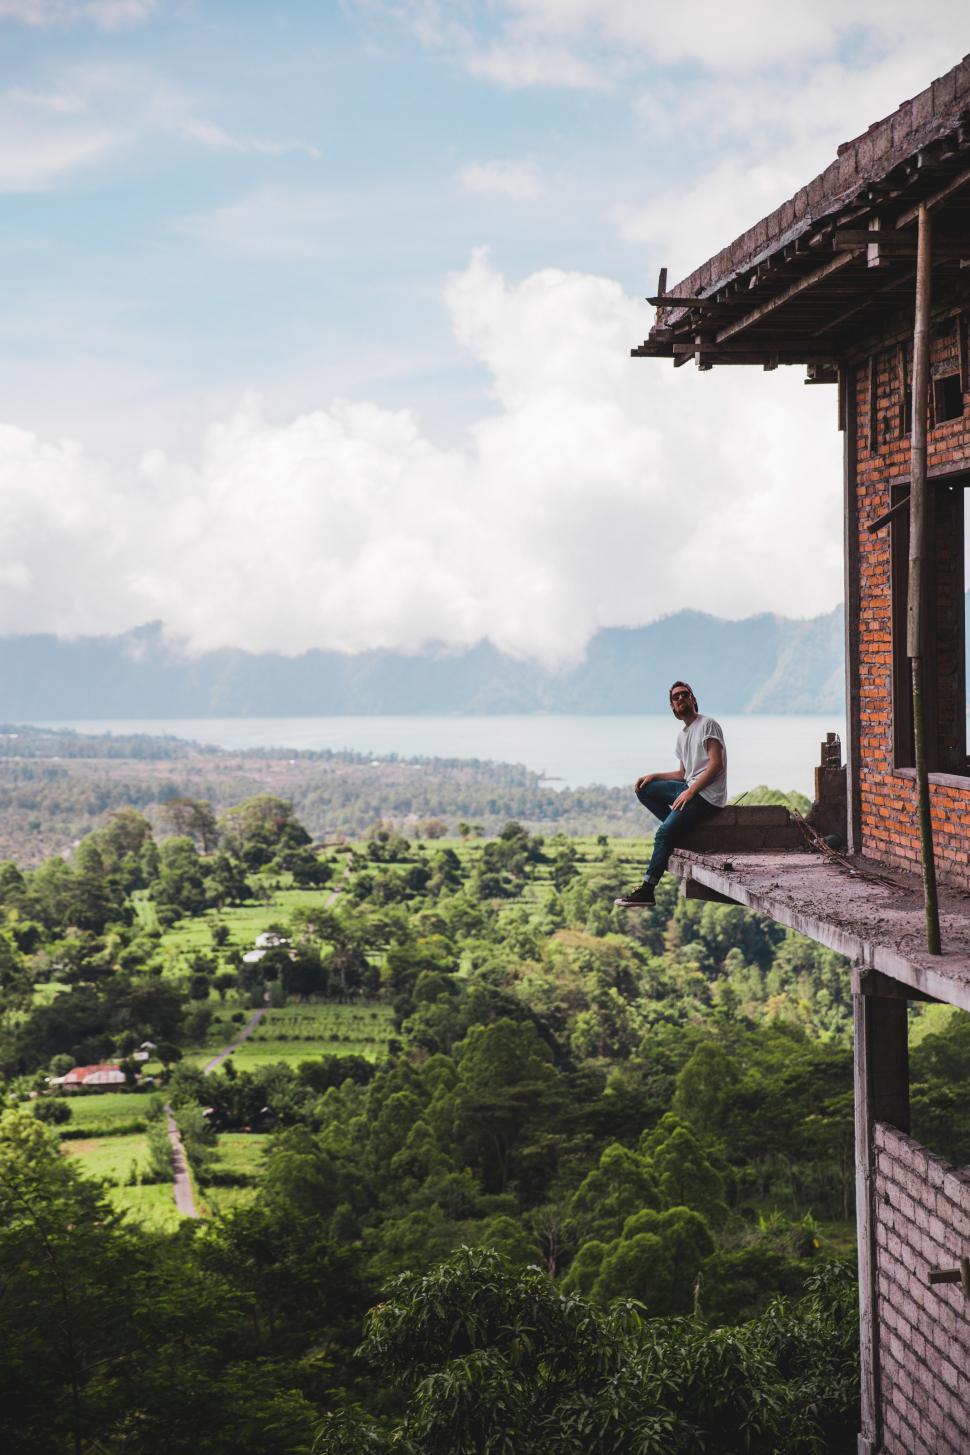 Free Image of A young Caucasian man sitting on the edge of a balcony 